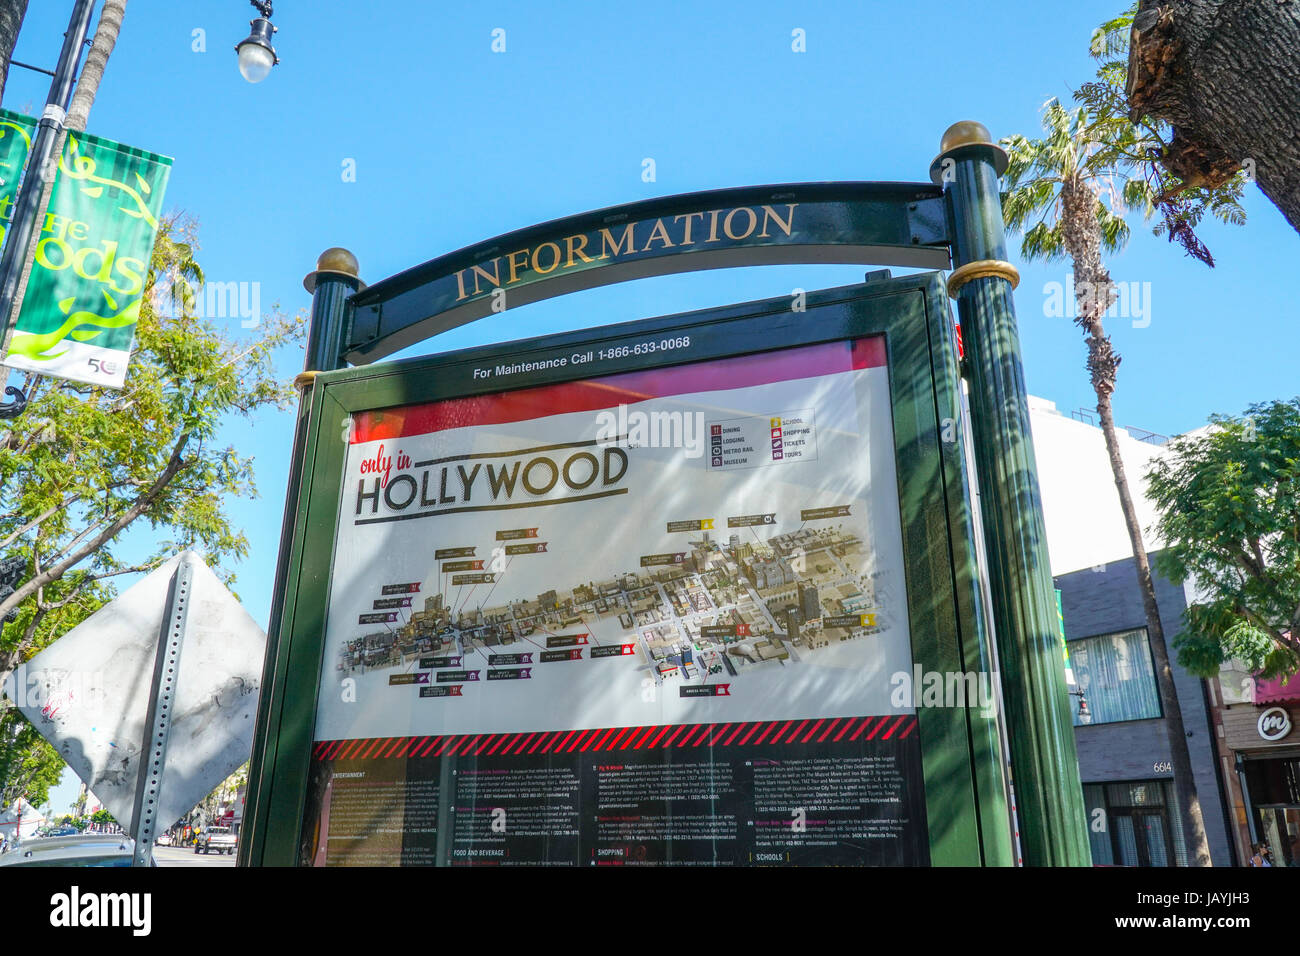 Map of Hollywood in Los Angeles - LOS ANGELES - CALIFORNIA Stock Photo